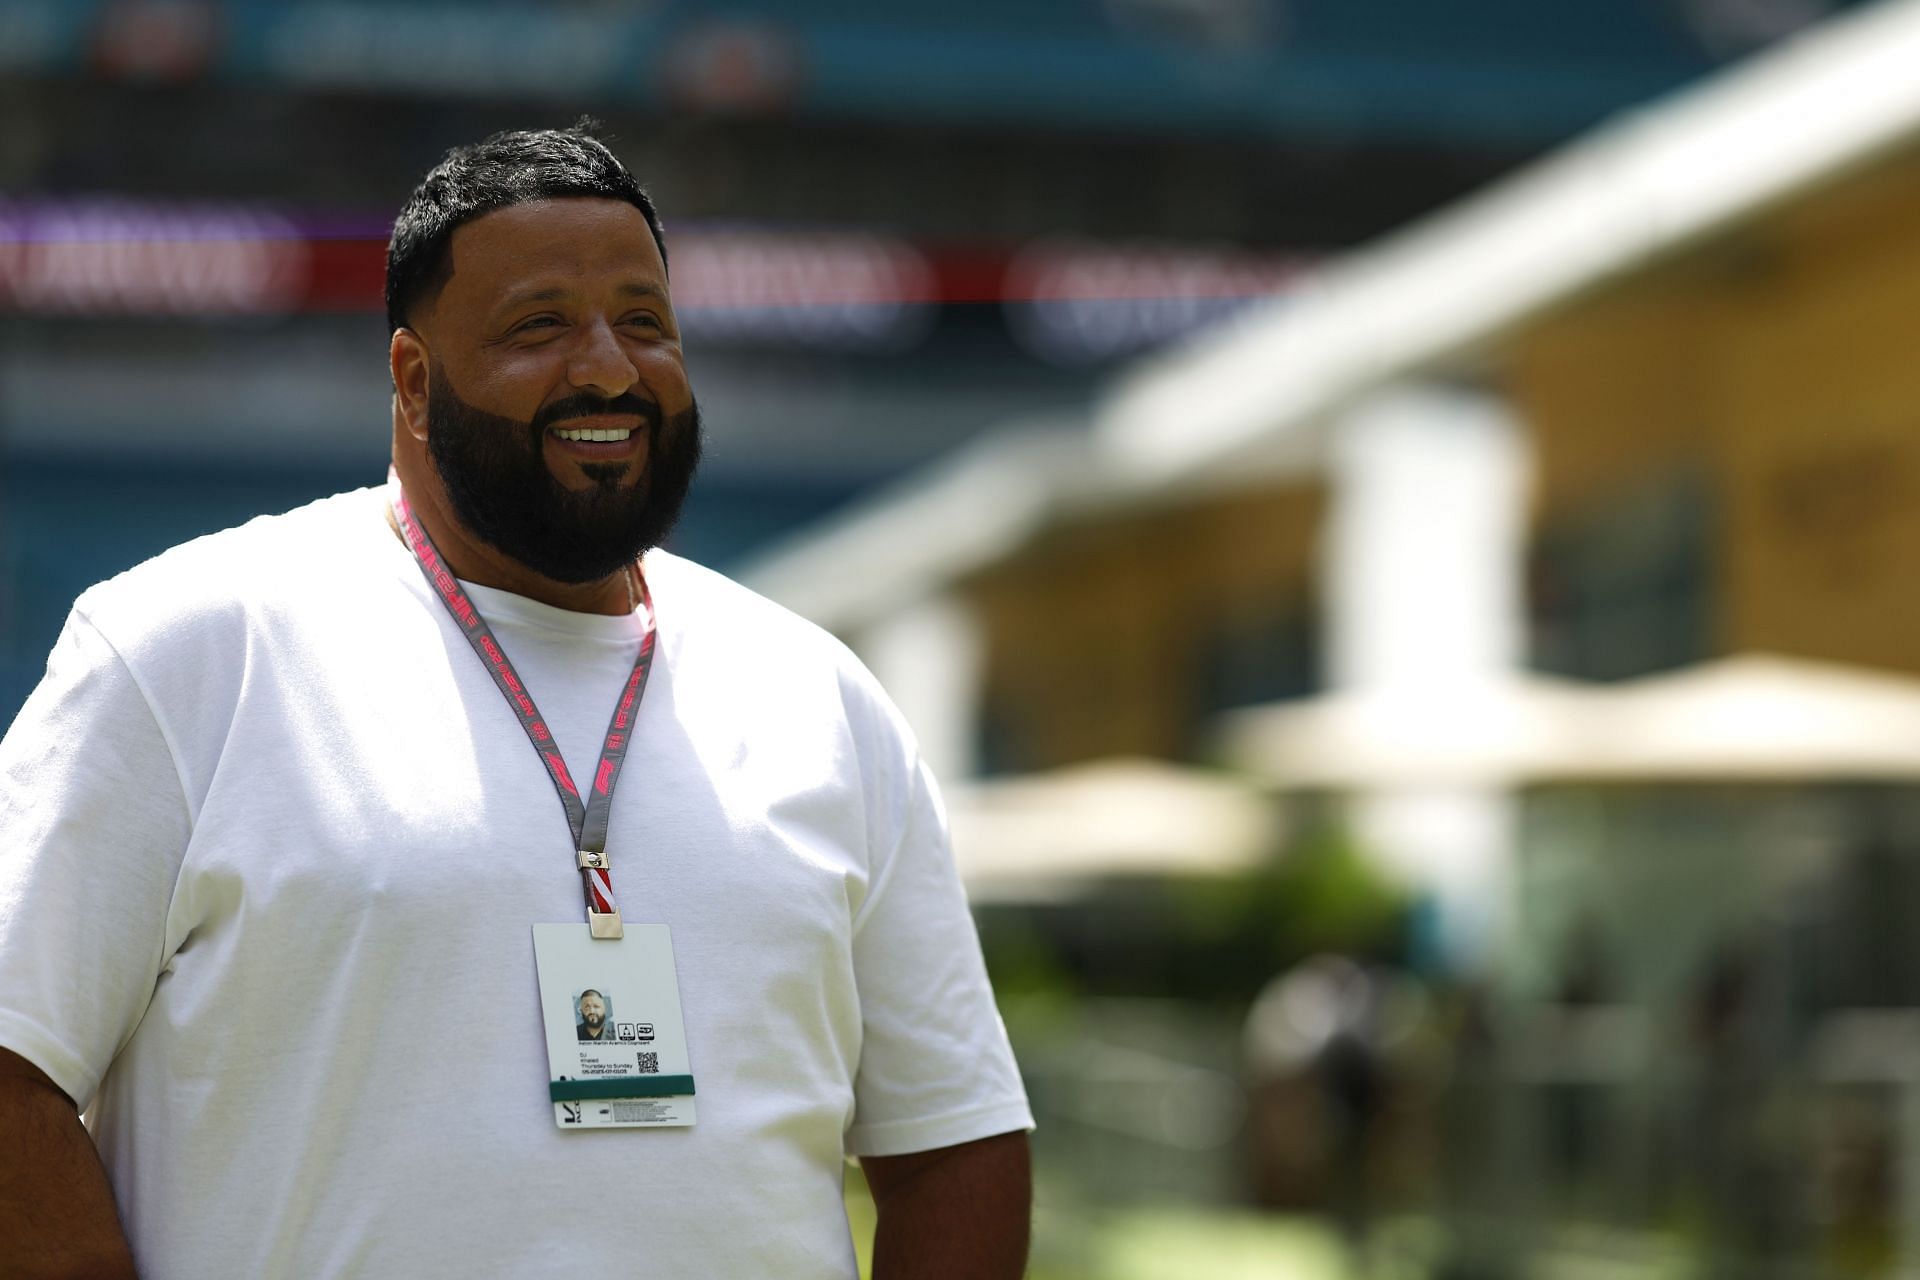 DJ Khaled lifts lid on new-found love of golf from 15lb weight loss to  screaming 'Let's go golfing!